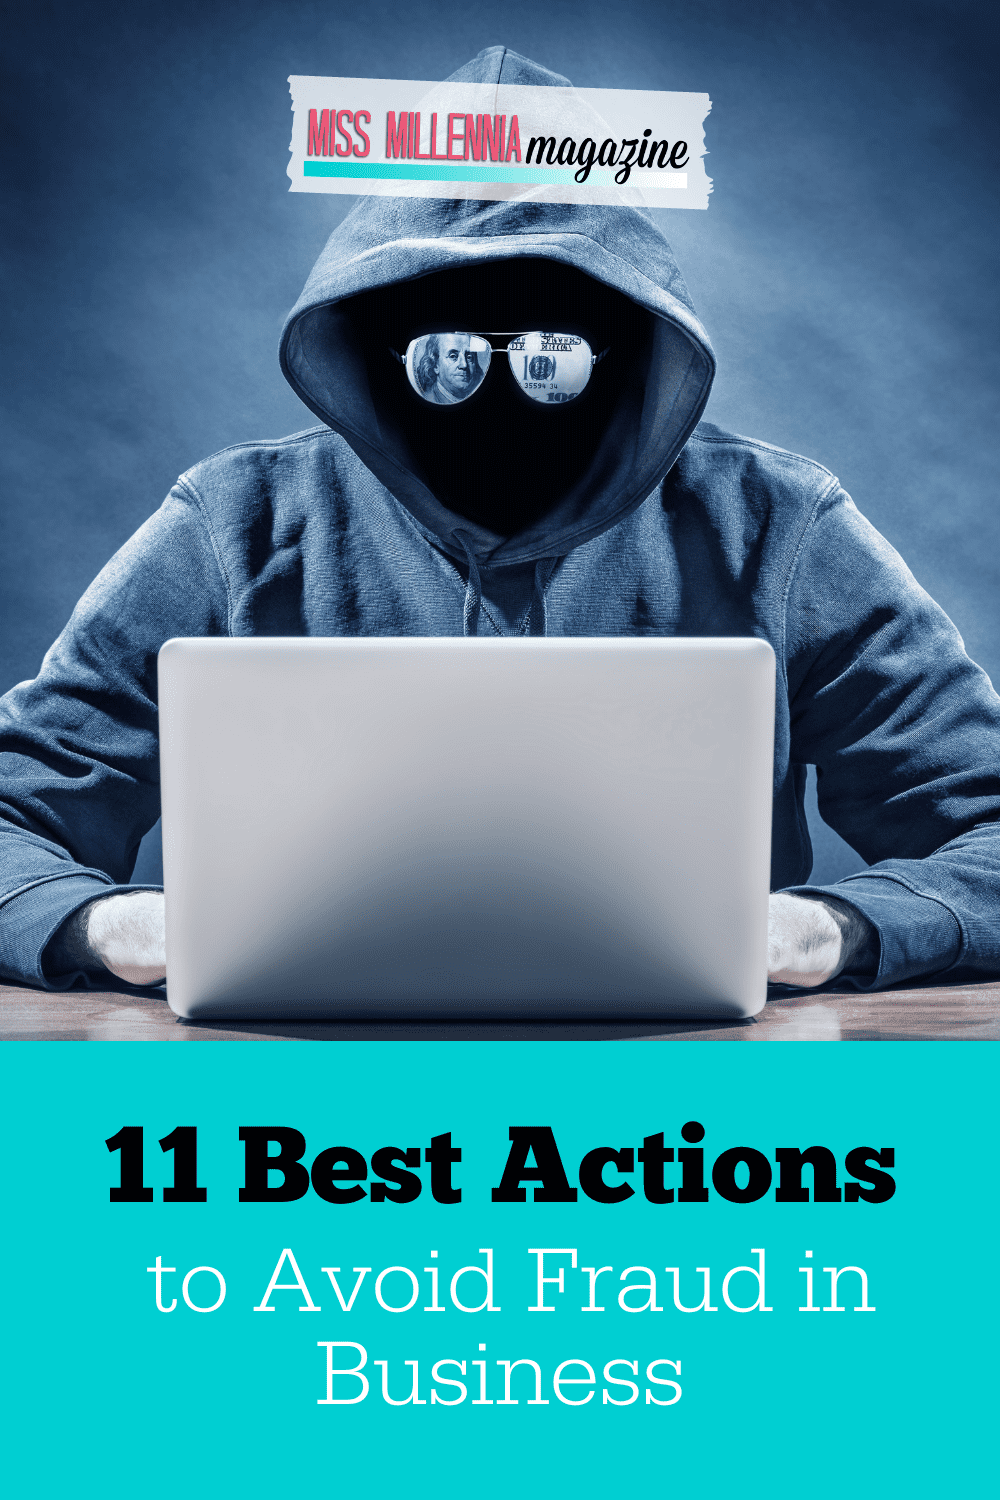 11 Best Actions to Avoid Fraud in Business